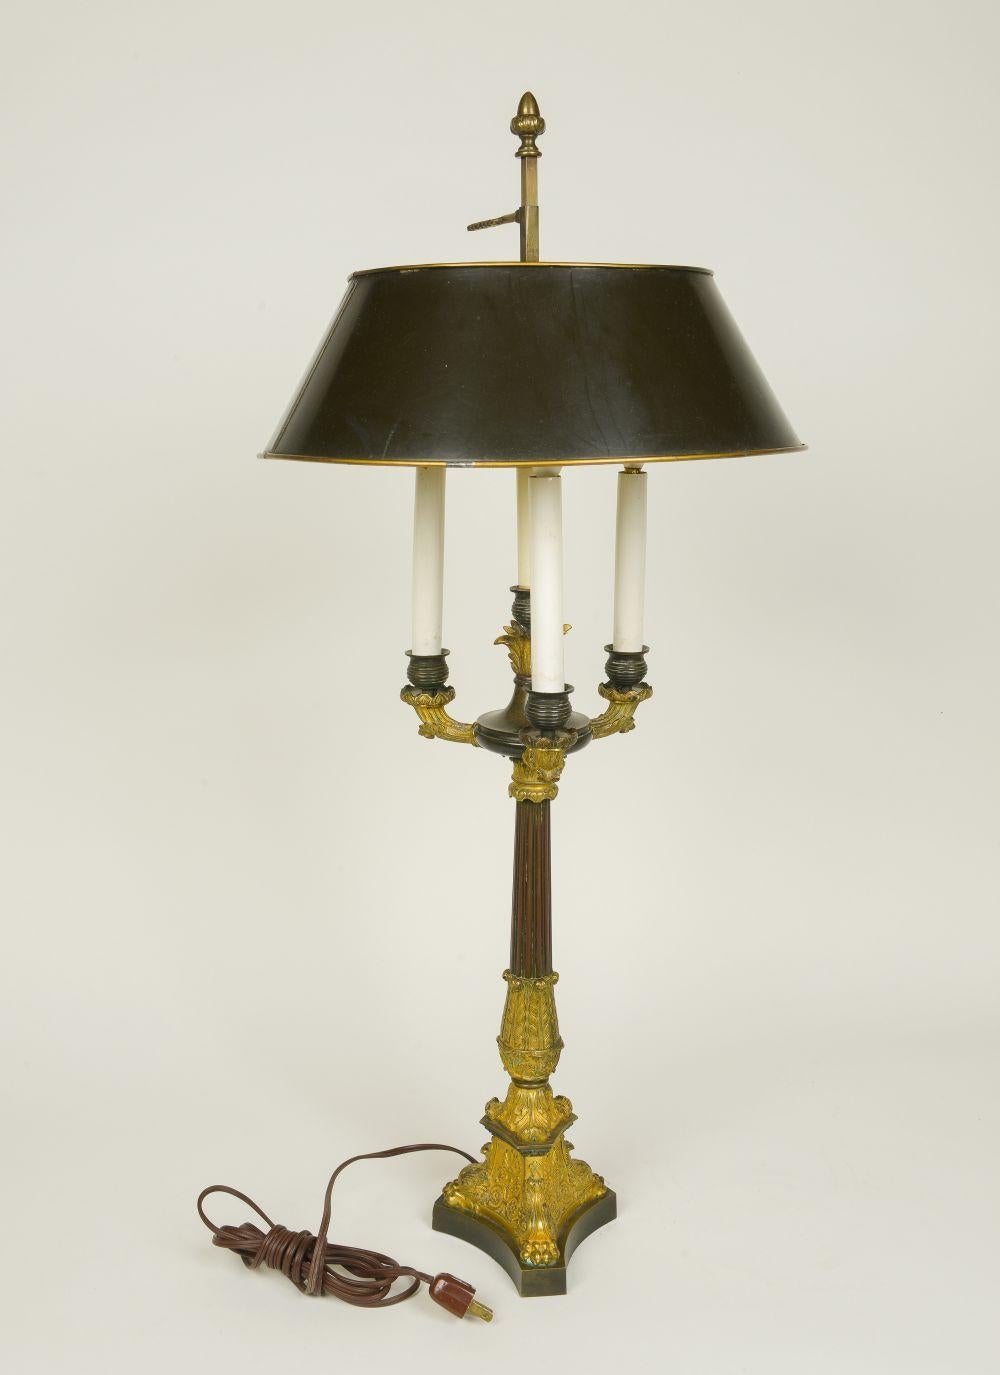 Of columnar form enriched with acanthus leave decoration, issuing three candlearms fitted with electrified candlesleeves, on a tripartite plinth base; with black and gilt tôle shade.